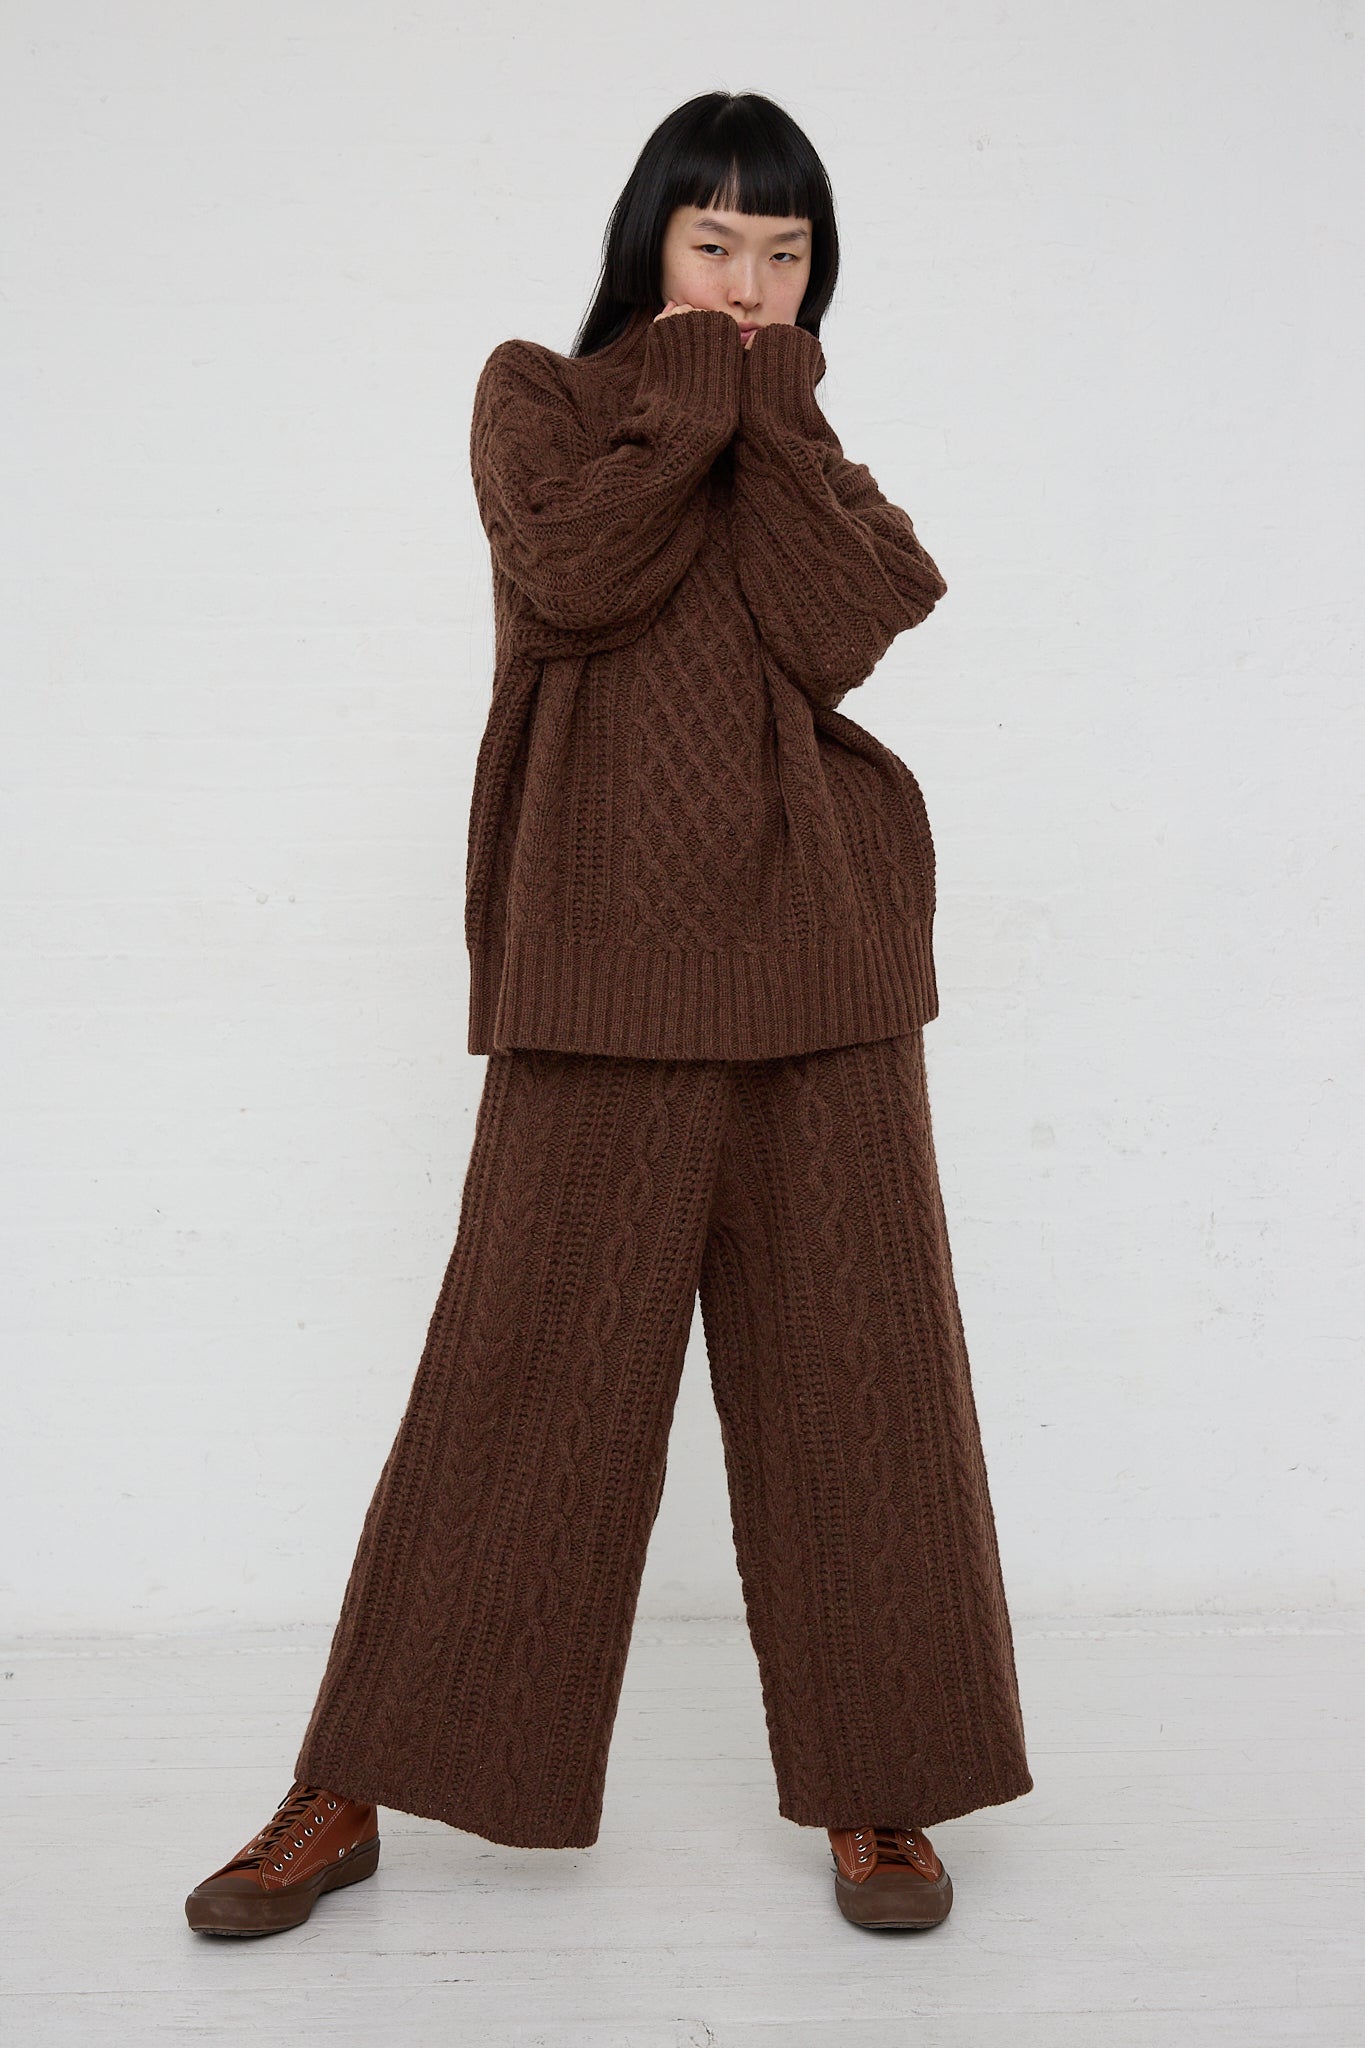 A woman wearing an Ichi Knit Turtleneck Pullover in Brown, a relaxed fit. Full length view.